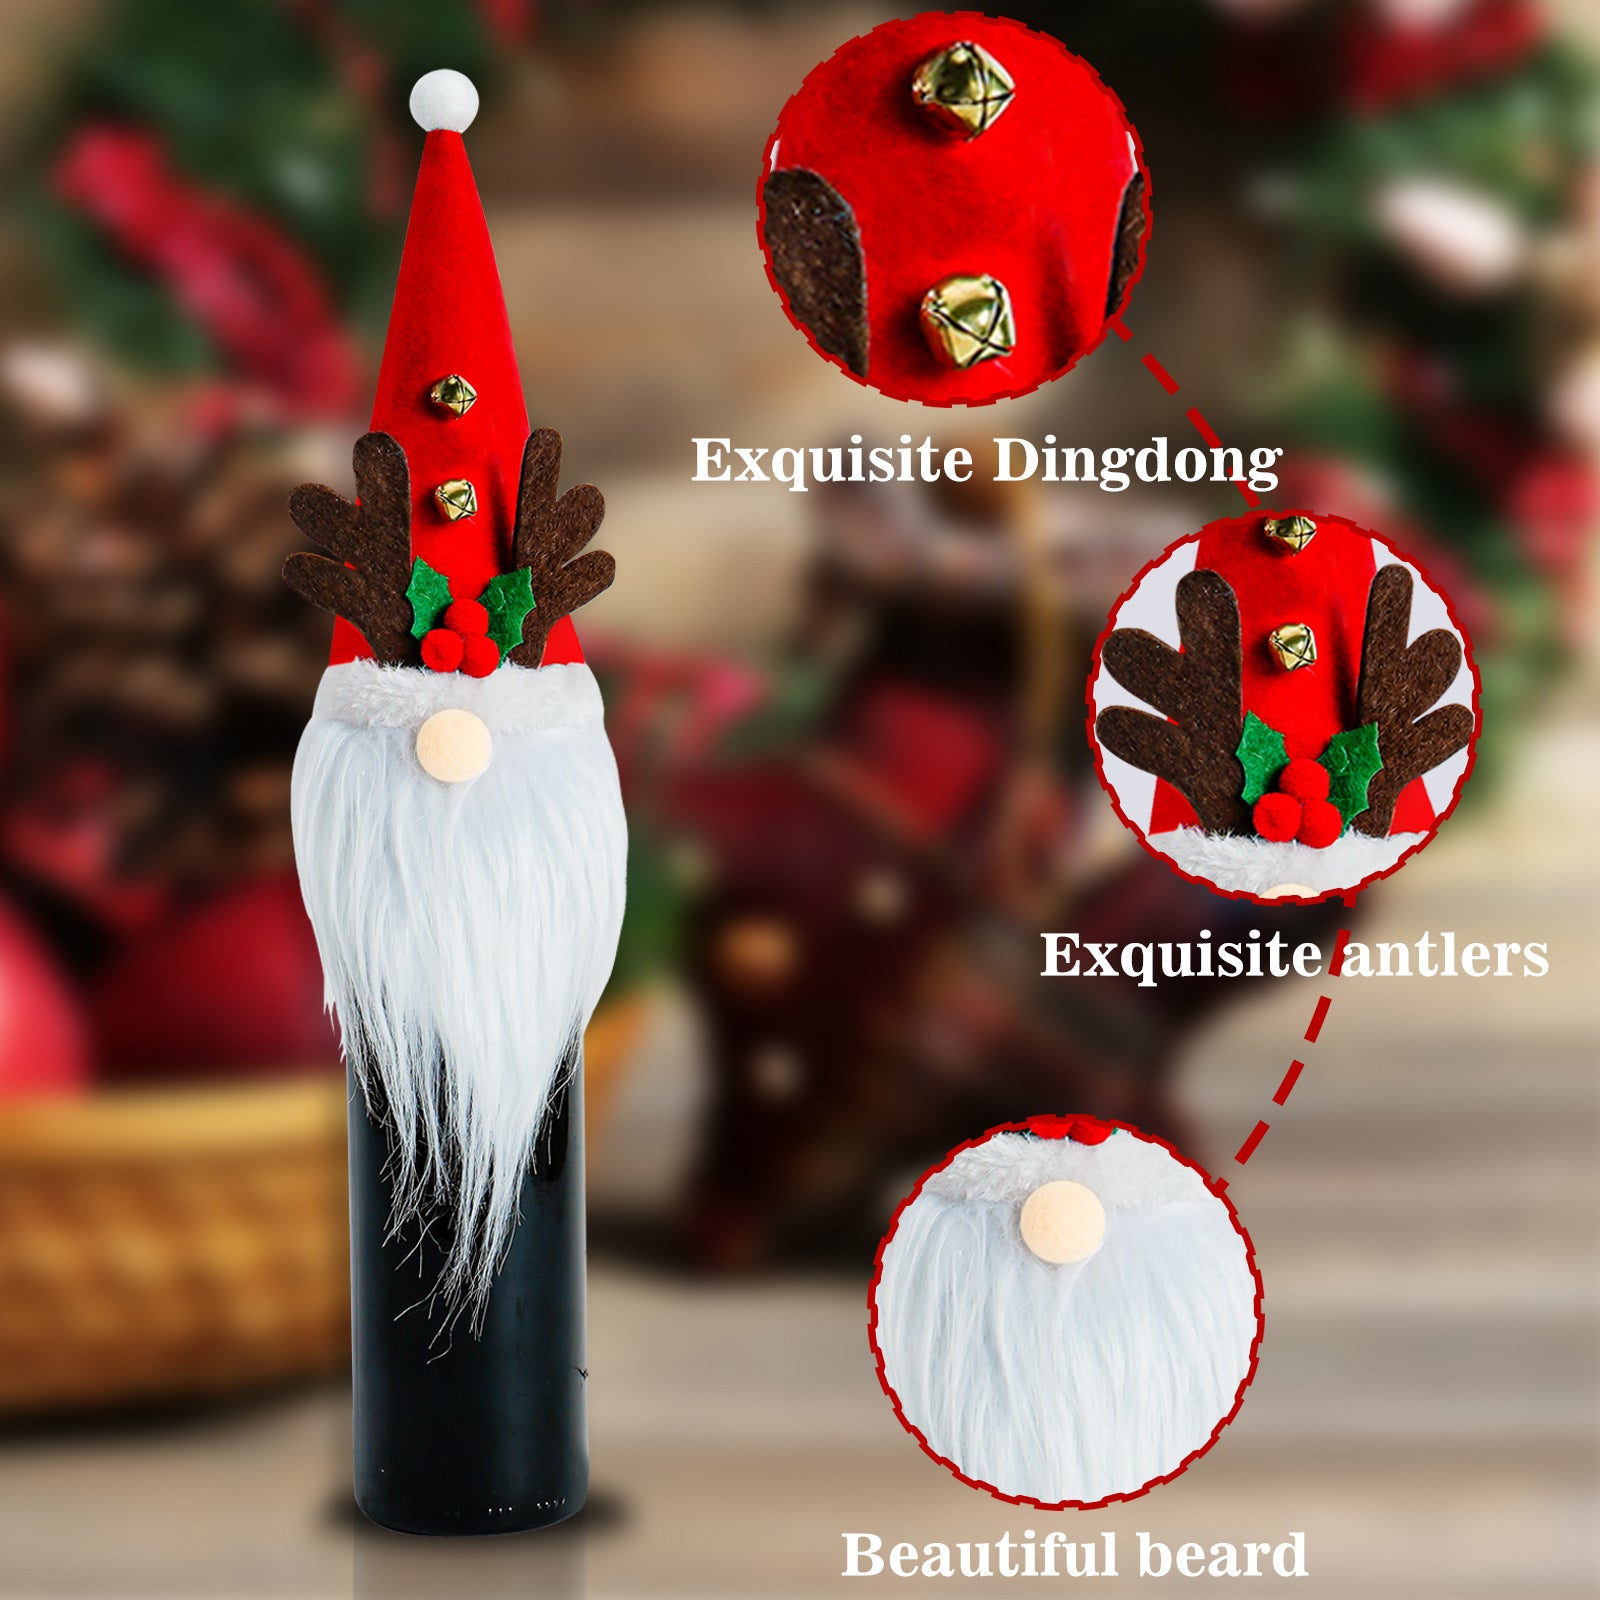 Home Fashion Christmas Decoration Bottle Cover